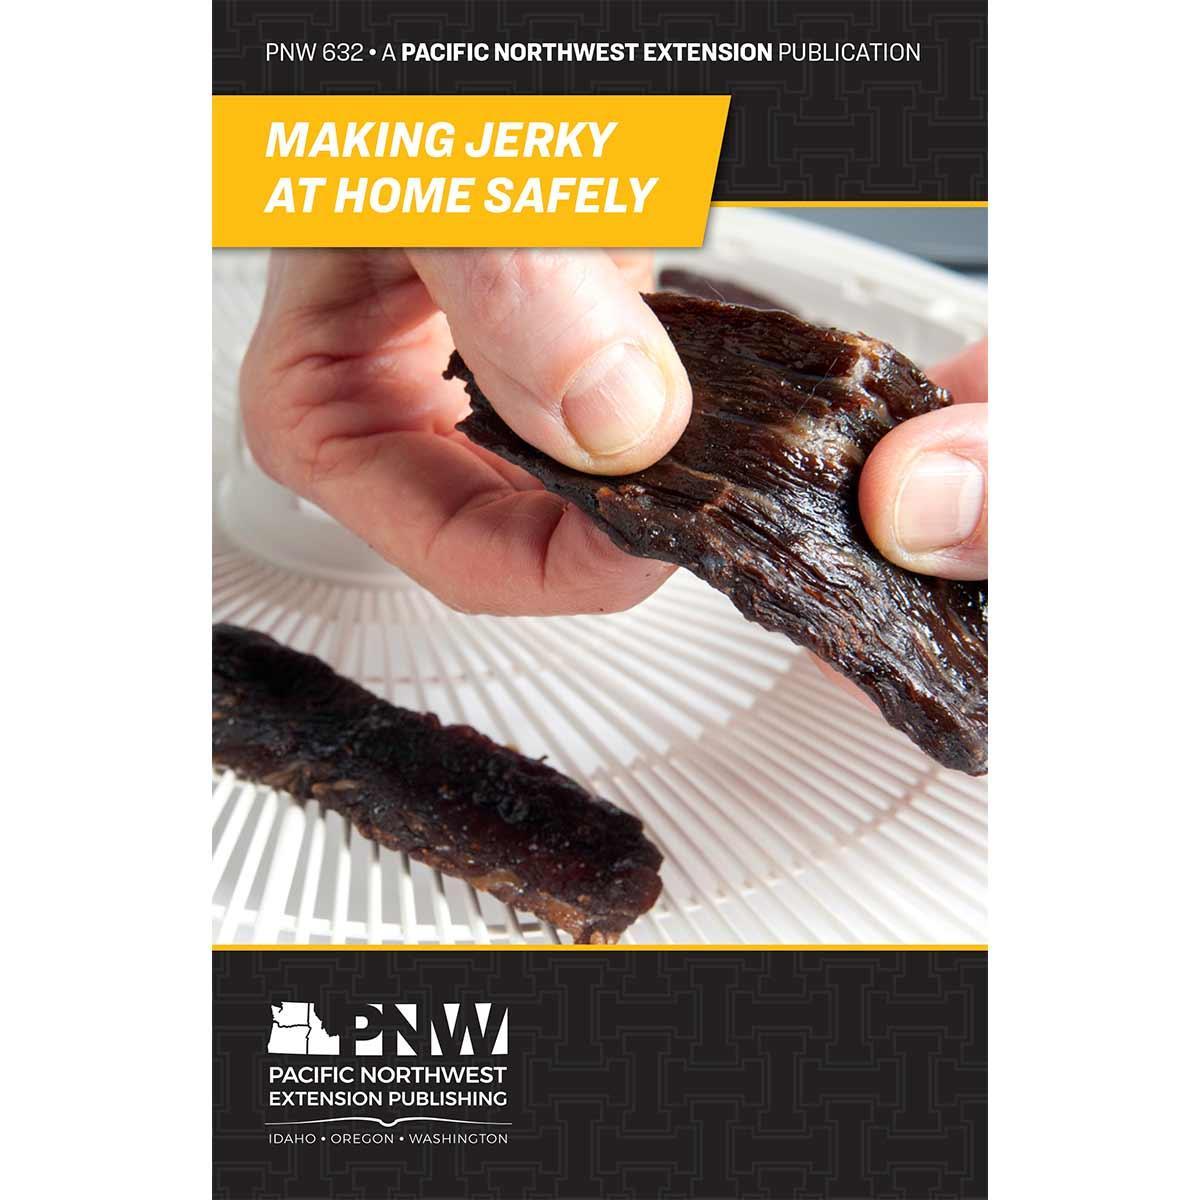 Cover image of "Making Jerky at Home Safely" publication